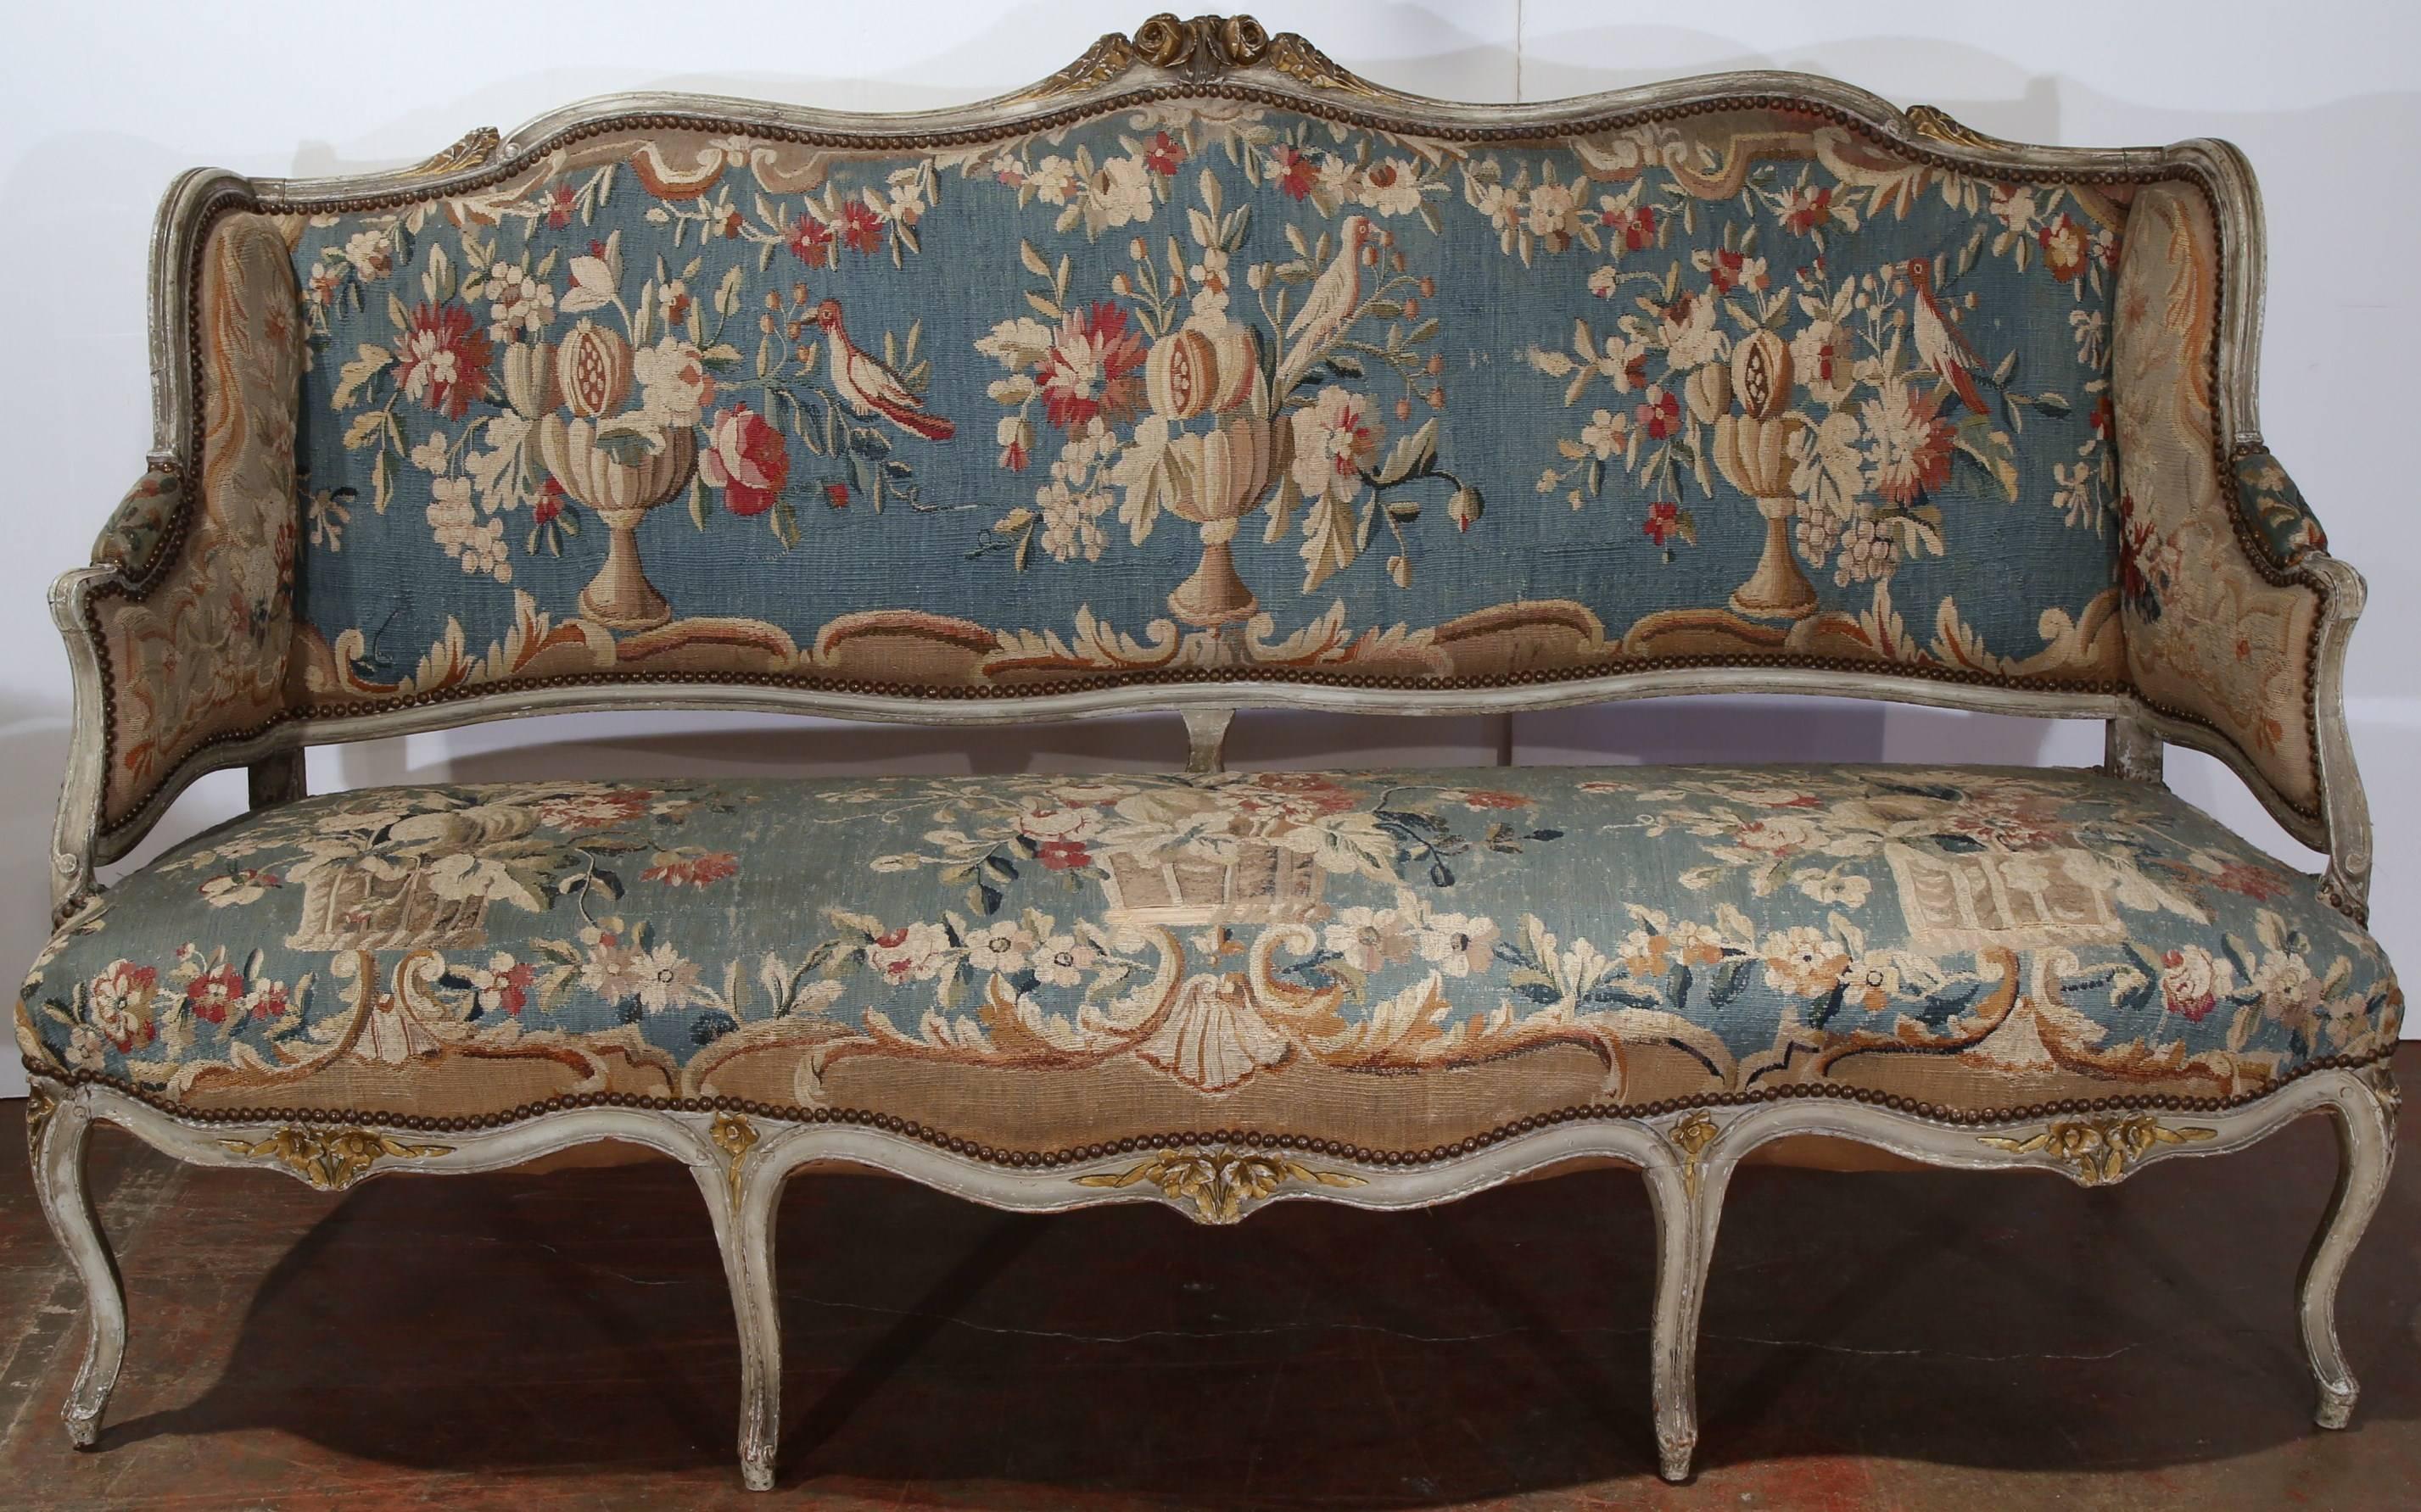 This elegant, antique painted settee was crafted in France, circa 1760. The classic French, Louis XV sofa features a shaped back with ear sides and sits on seven cabriole legs. The canapé is upholstered with its original Aubusson tapestry, which is